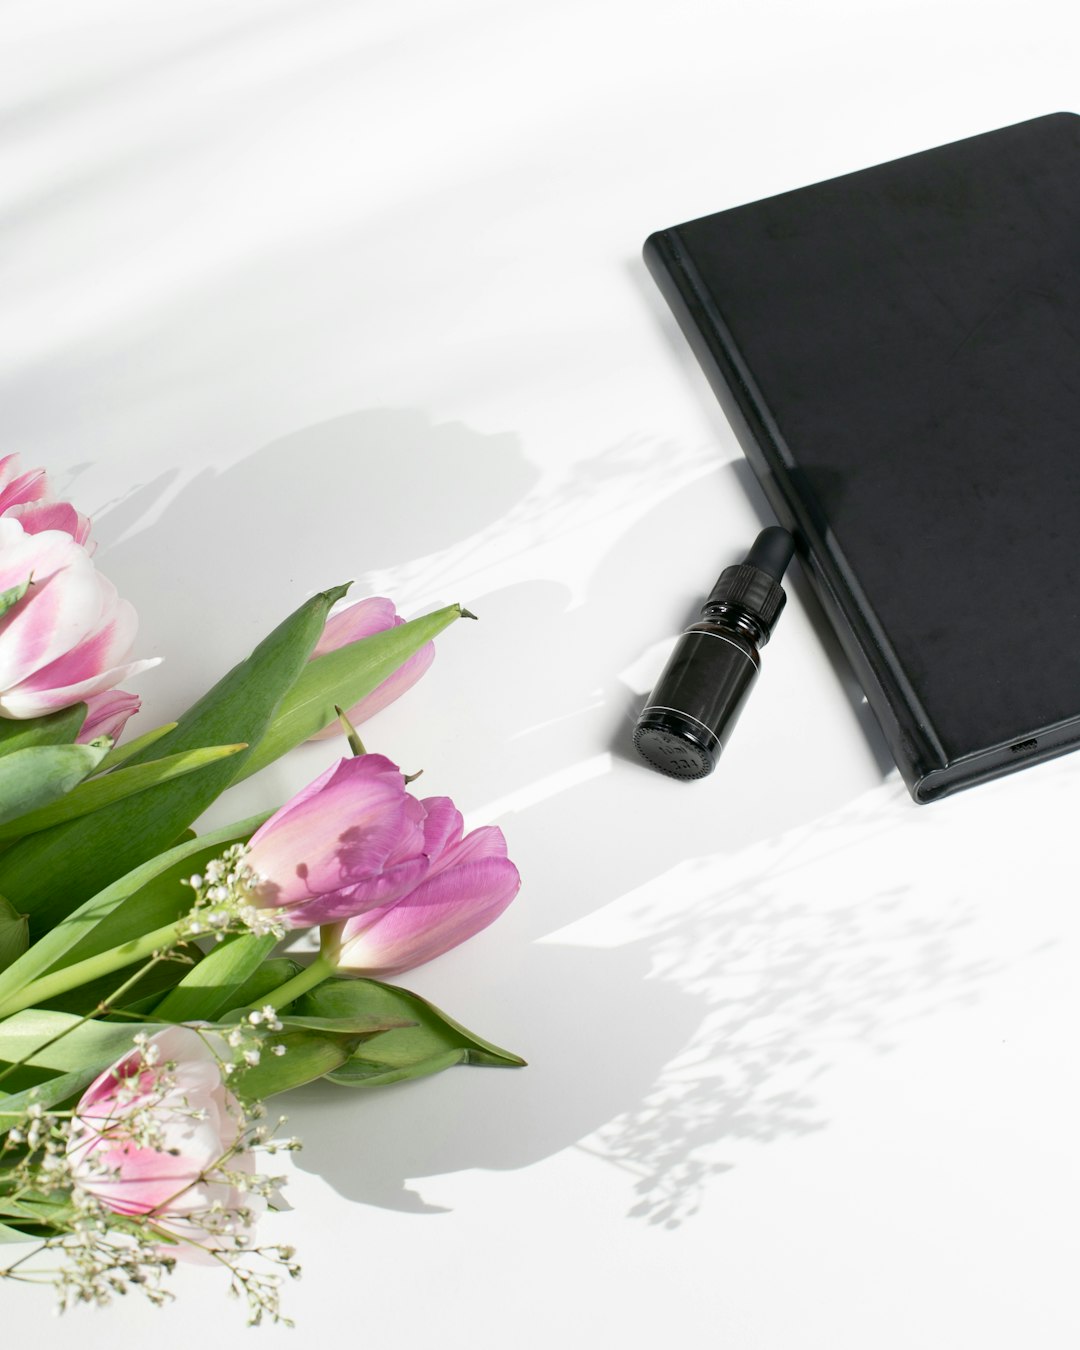 black book on white and pink floral textile